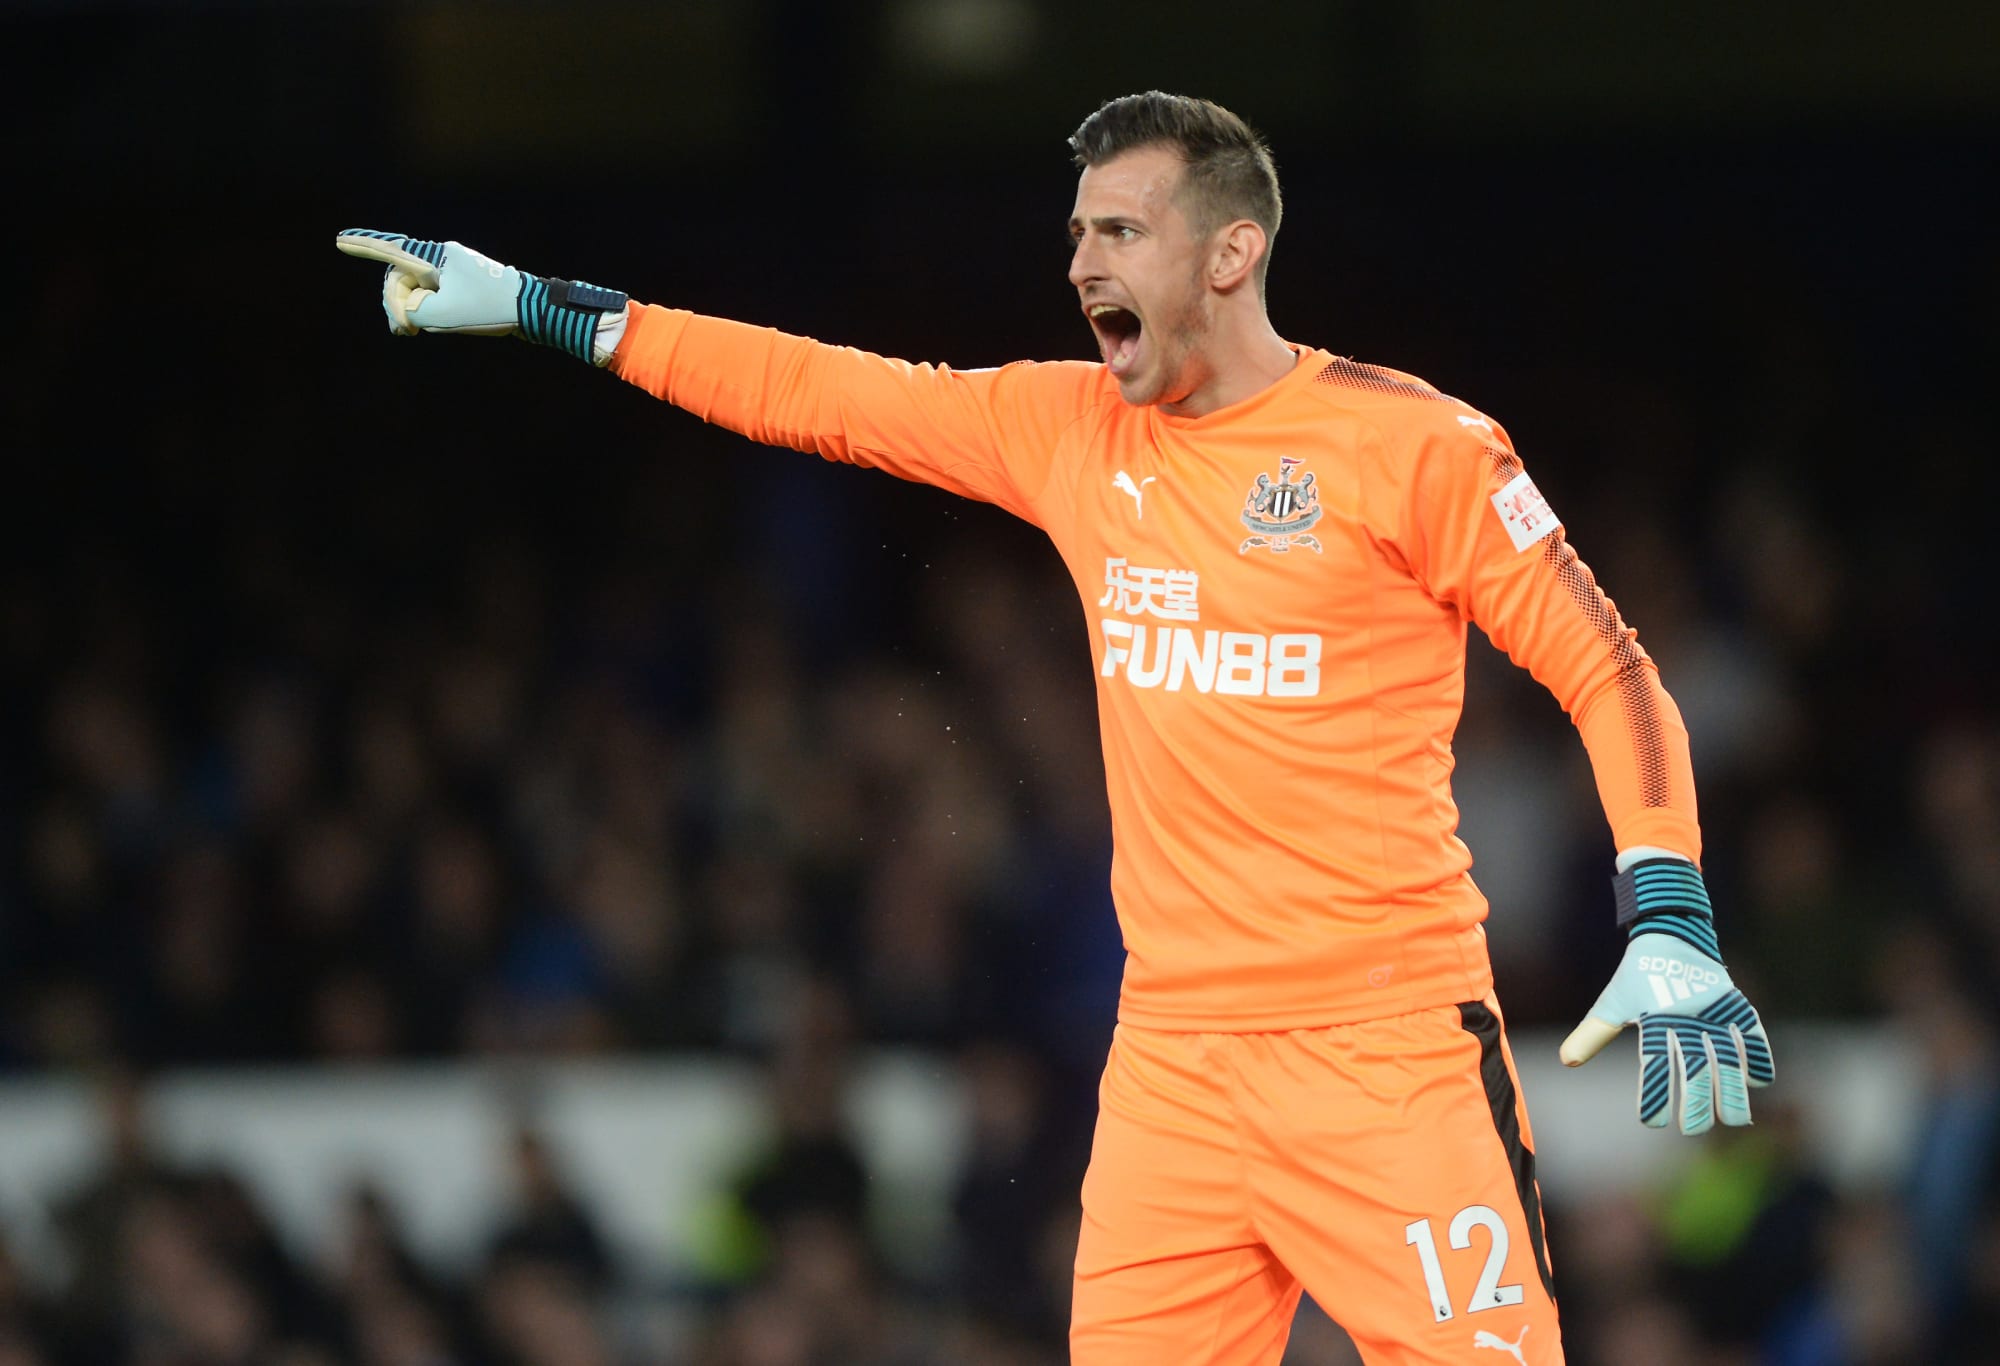 Newcastle United's Dubravka is the hero we didn't know we needed